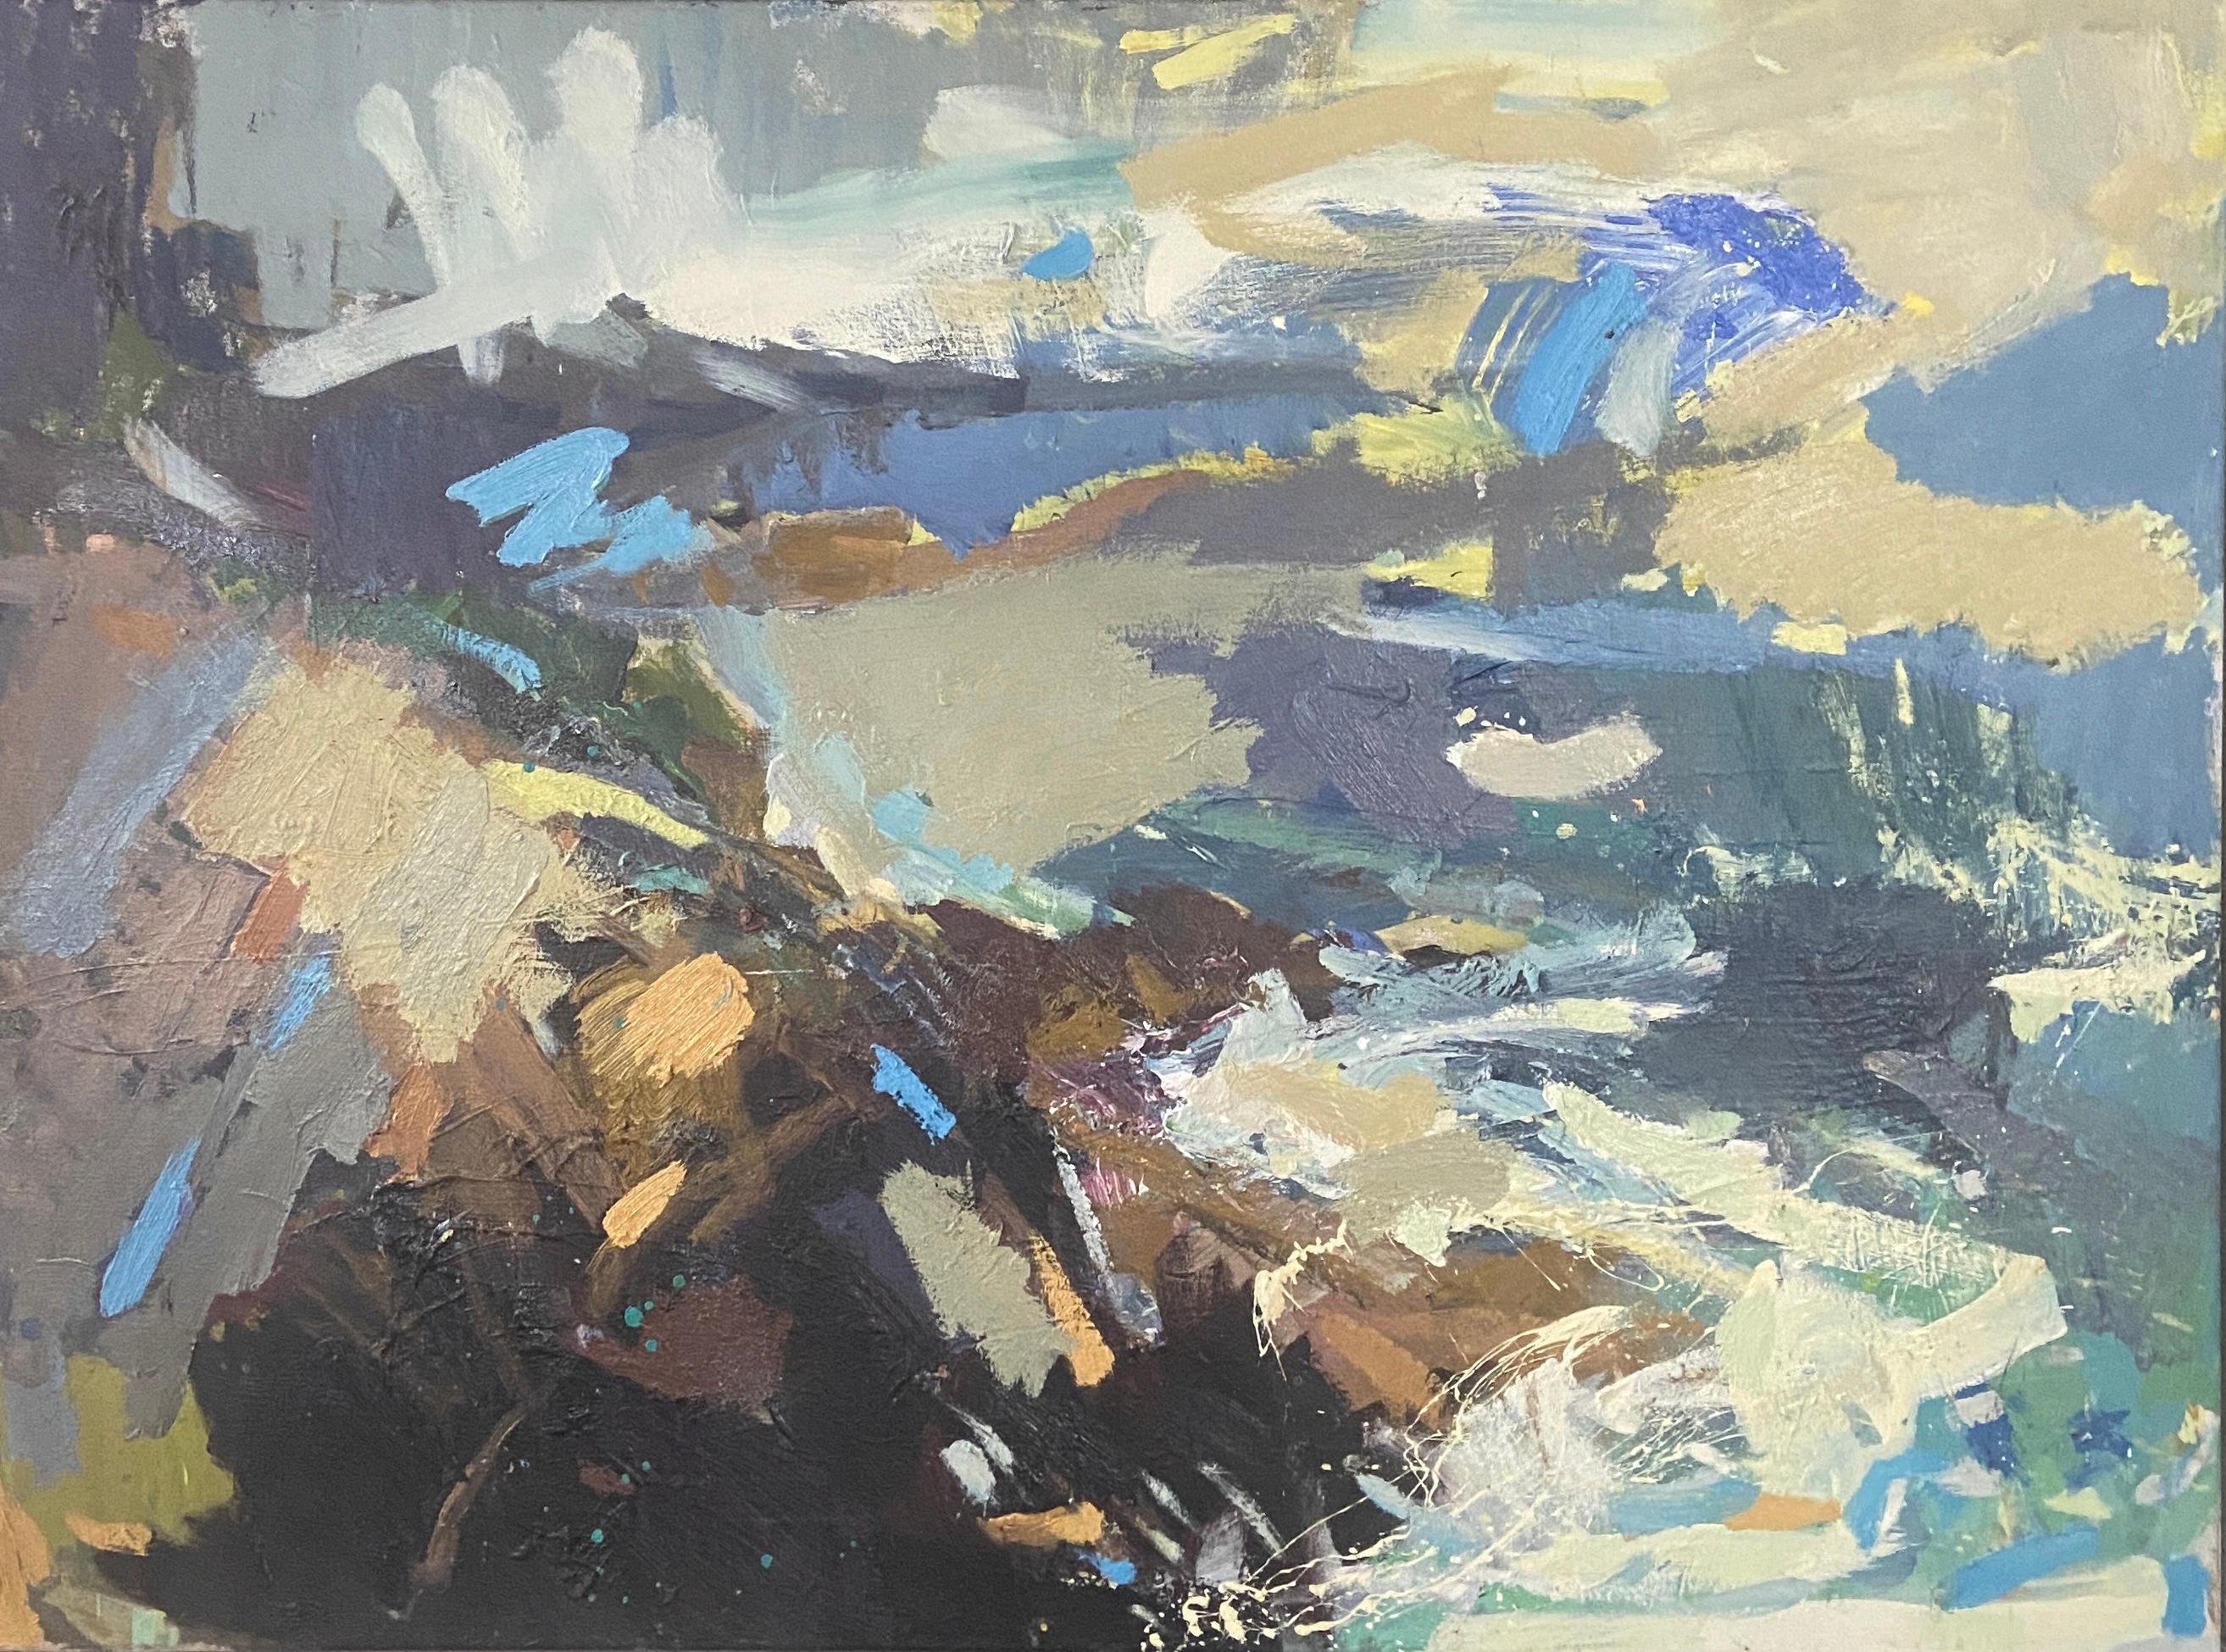 Paul wadsworth Abstract Painting - St Ives Bay, Contemporary Expressionist Oil Painting